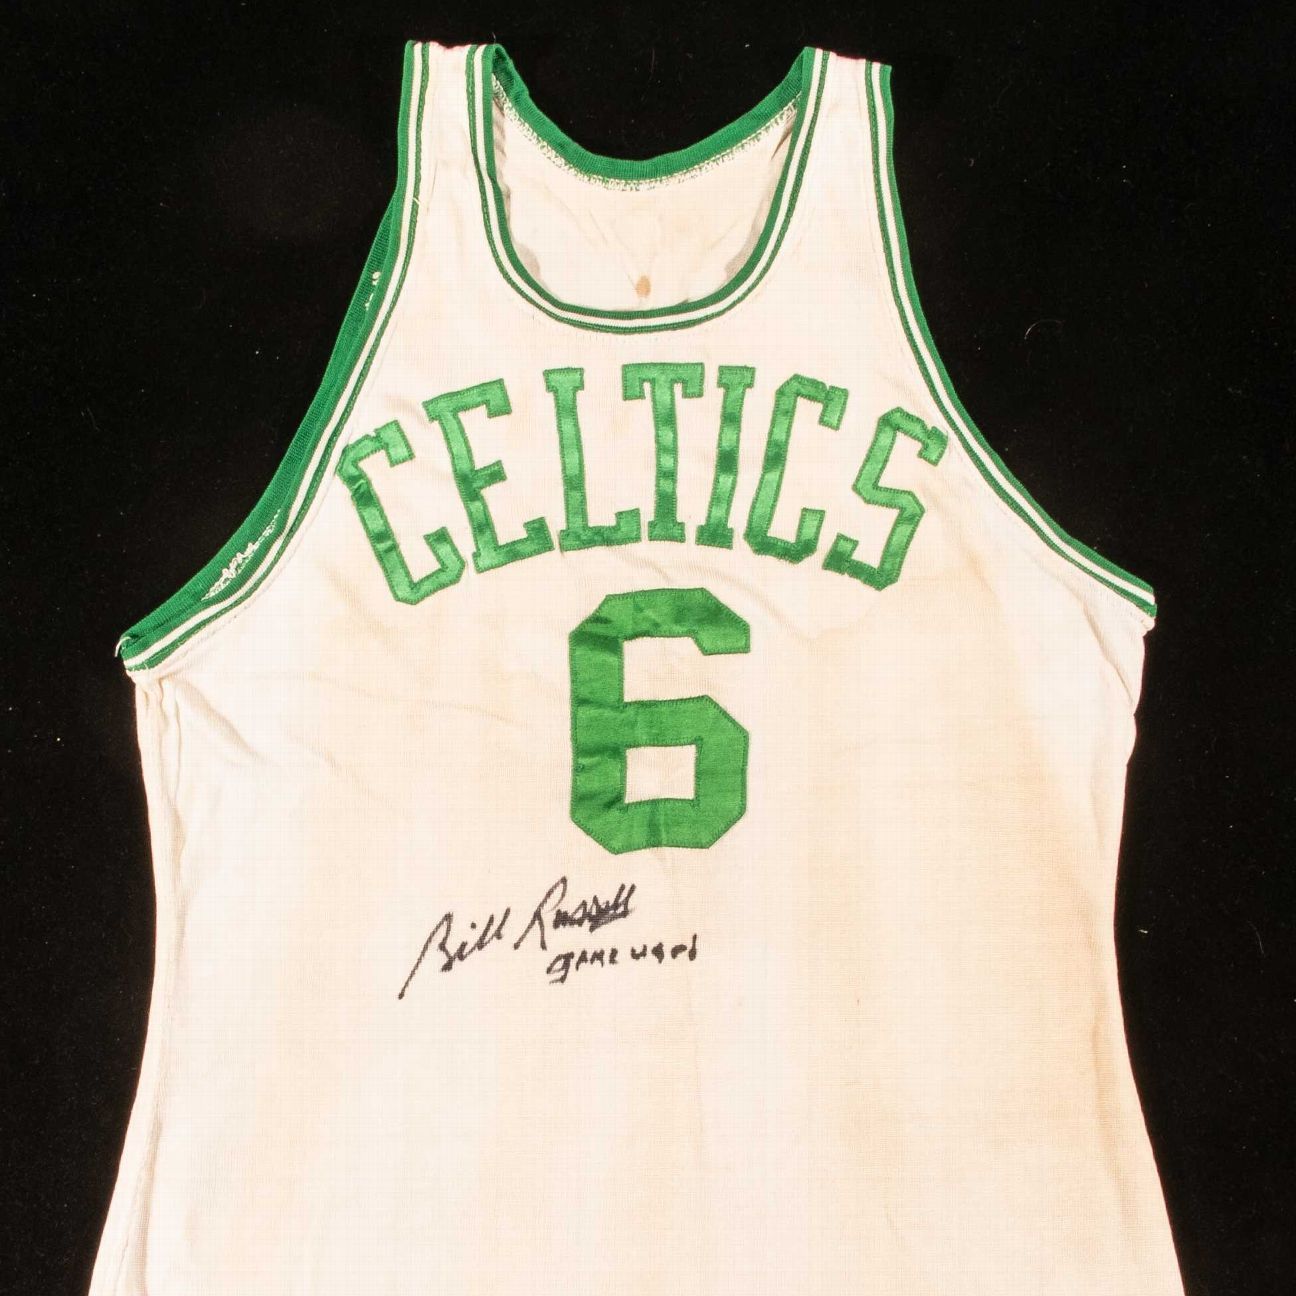 Game-worn NBA Finals memorabilia could be yours